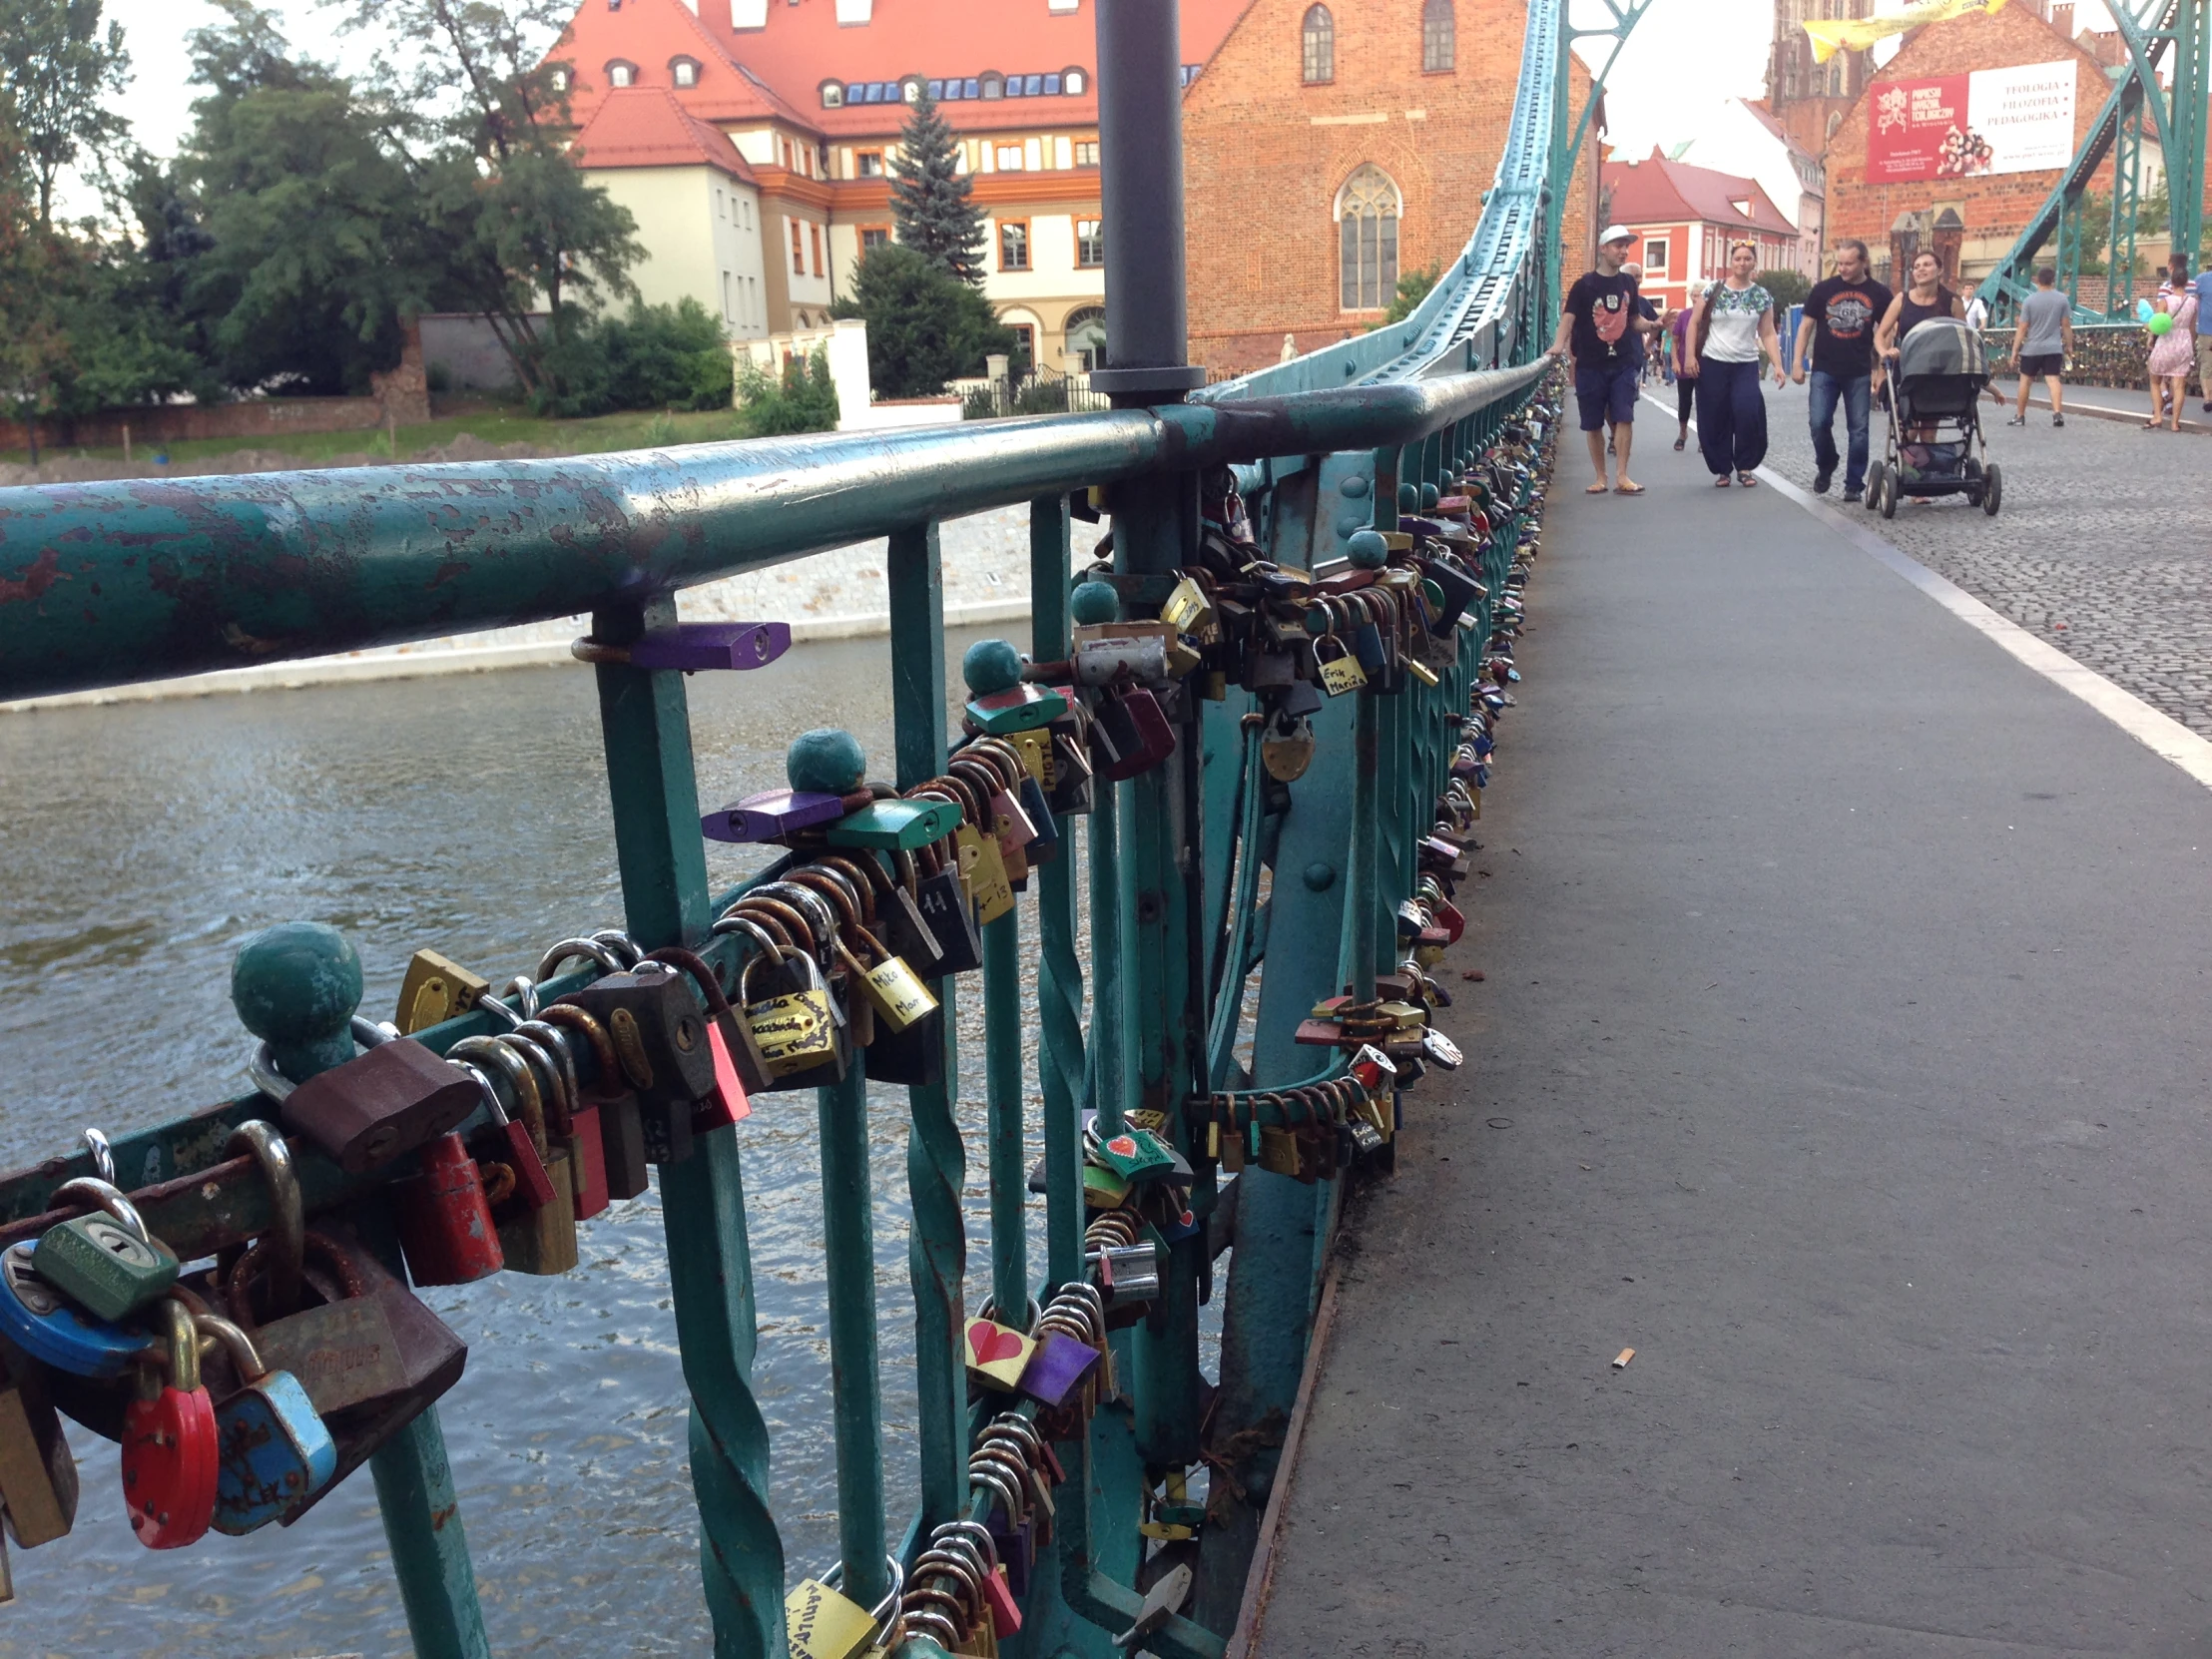 there are many locks attached to the bridge